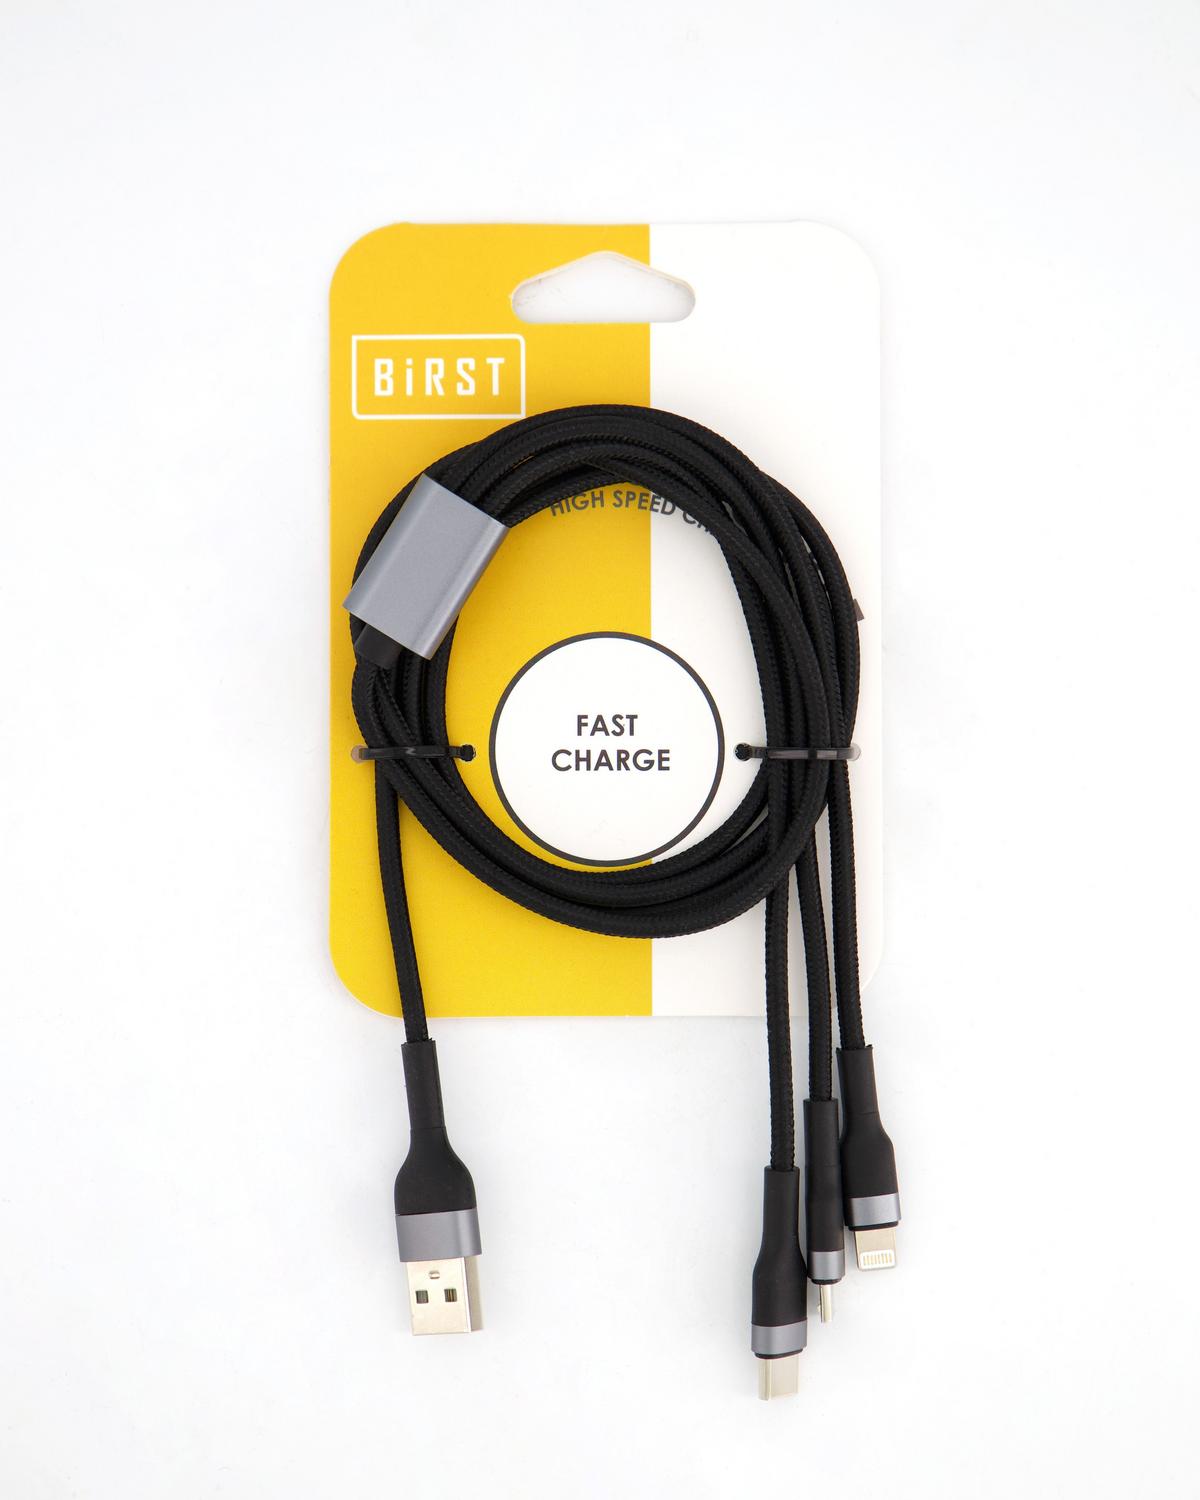 Birst 3 in 1 fabric braided charging cable 1.2m 2amp -  Black